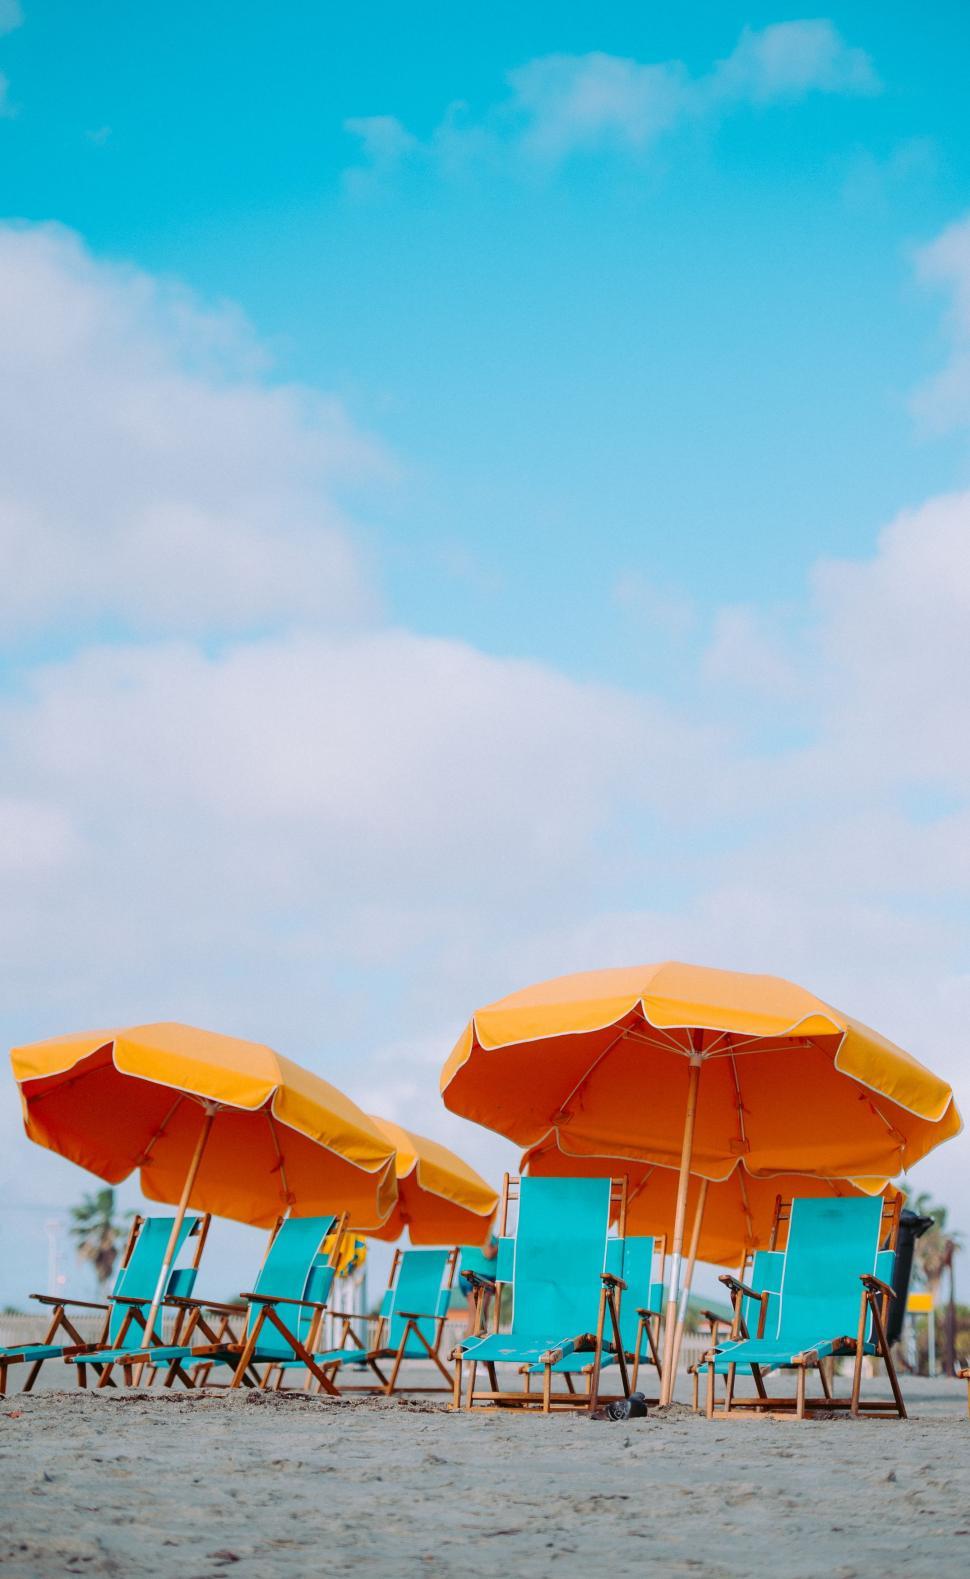 Free Image of Rows of Chairs and Umbrellas on a Sandy Beach 